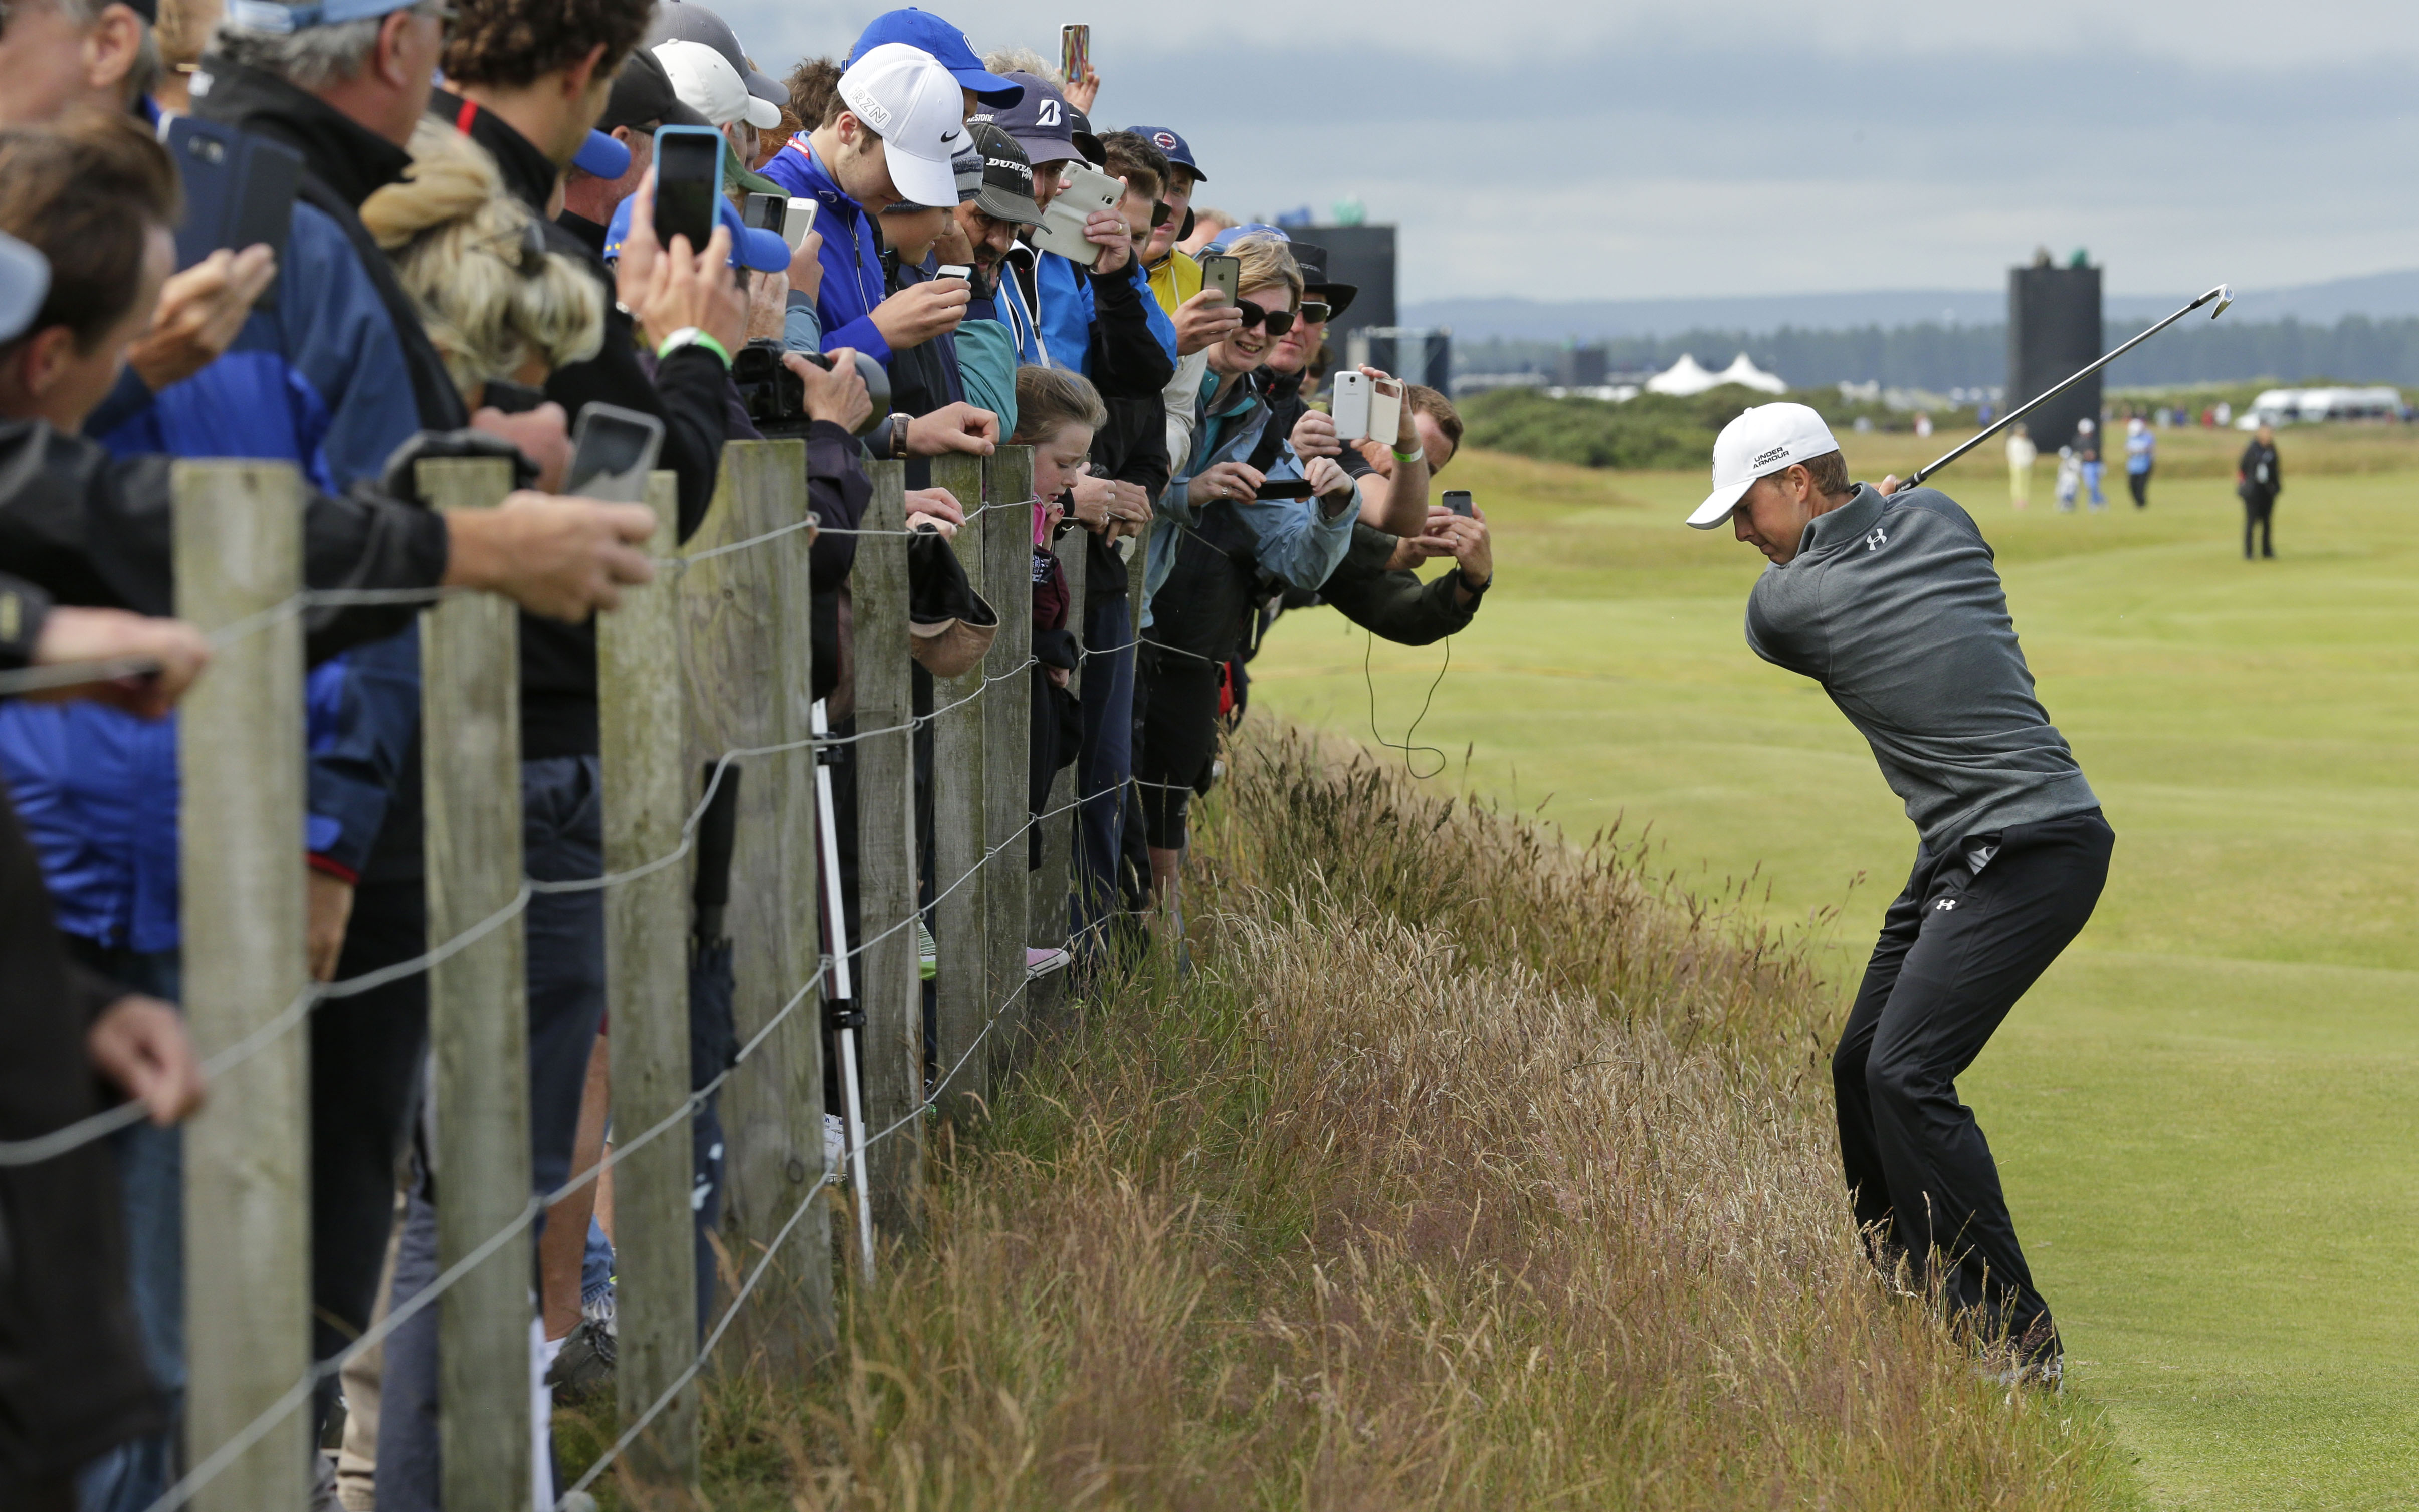 Jordan Spieth plays from the rough on hole 16 during a practice round at the British Open at St. Andrews. Photo: AP
